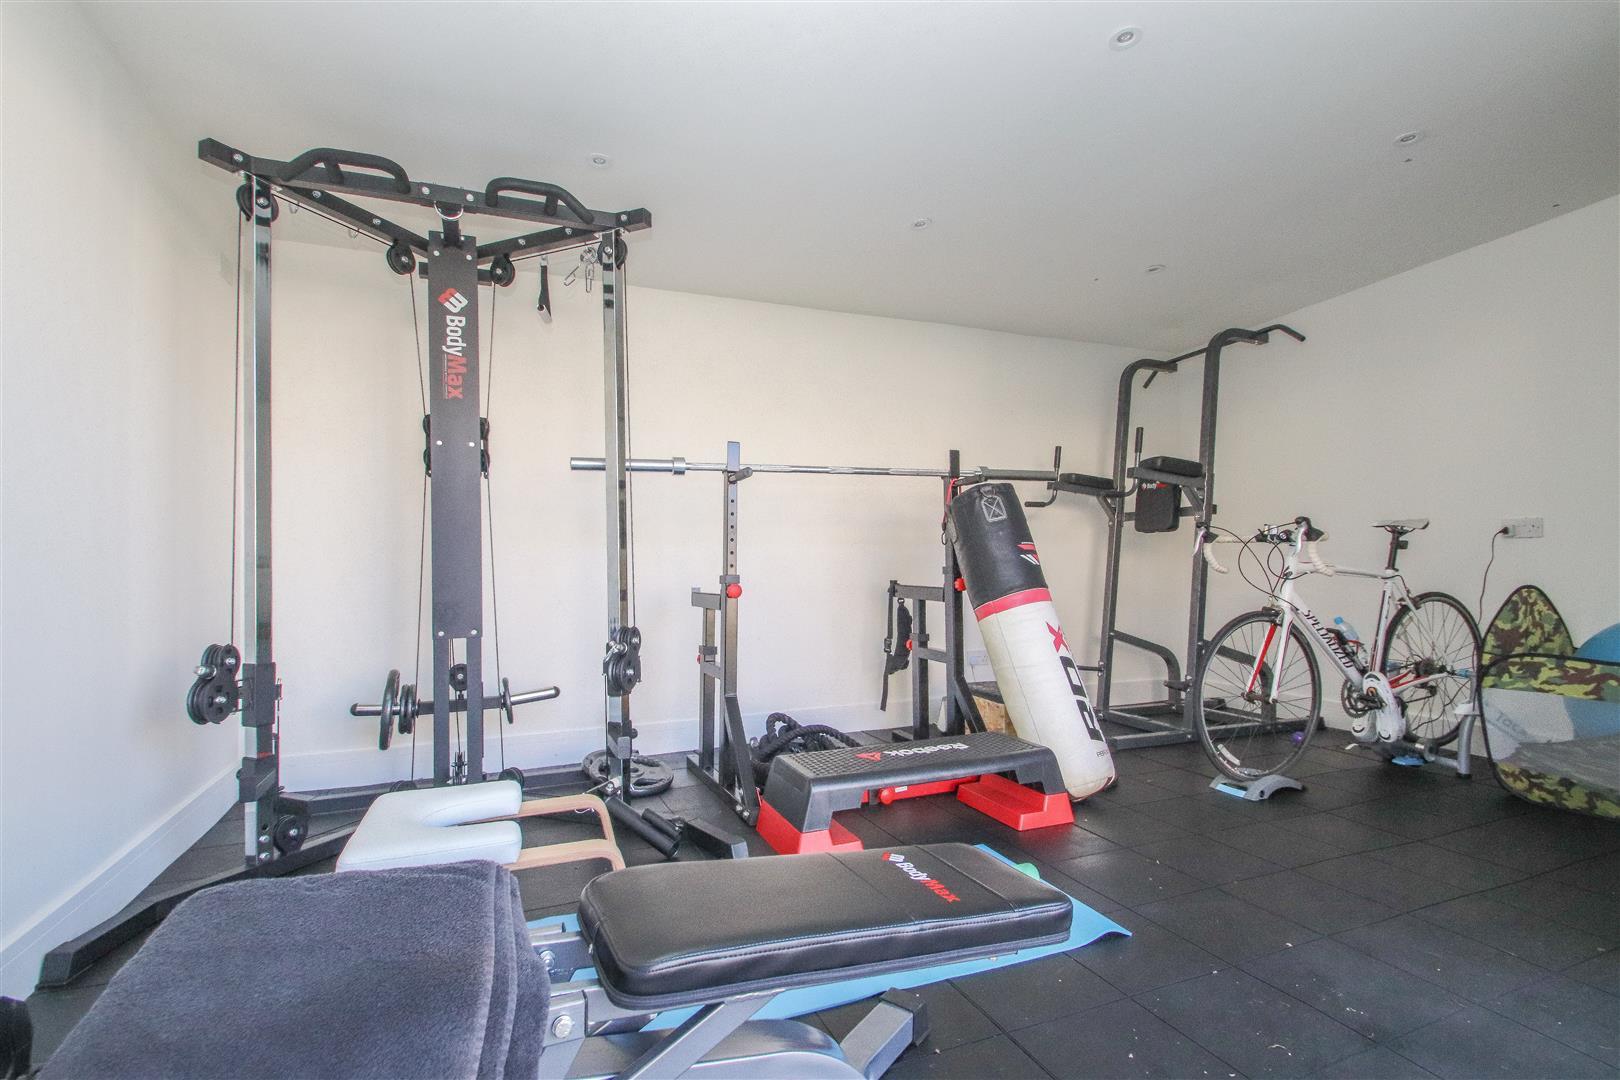 Time to workout - the annex contains a home gym